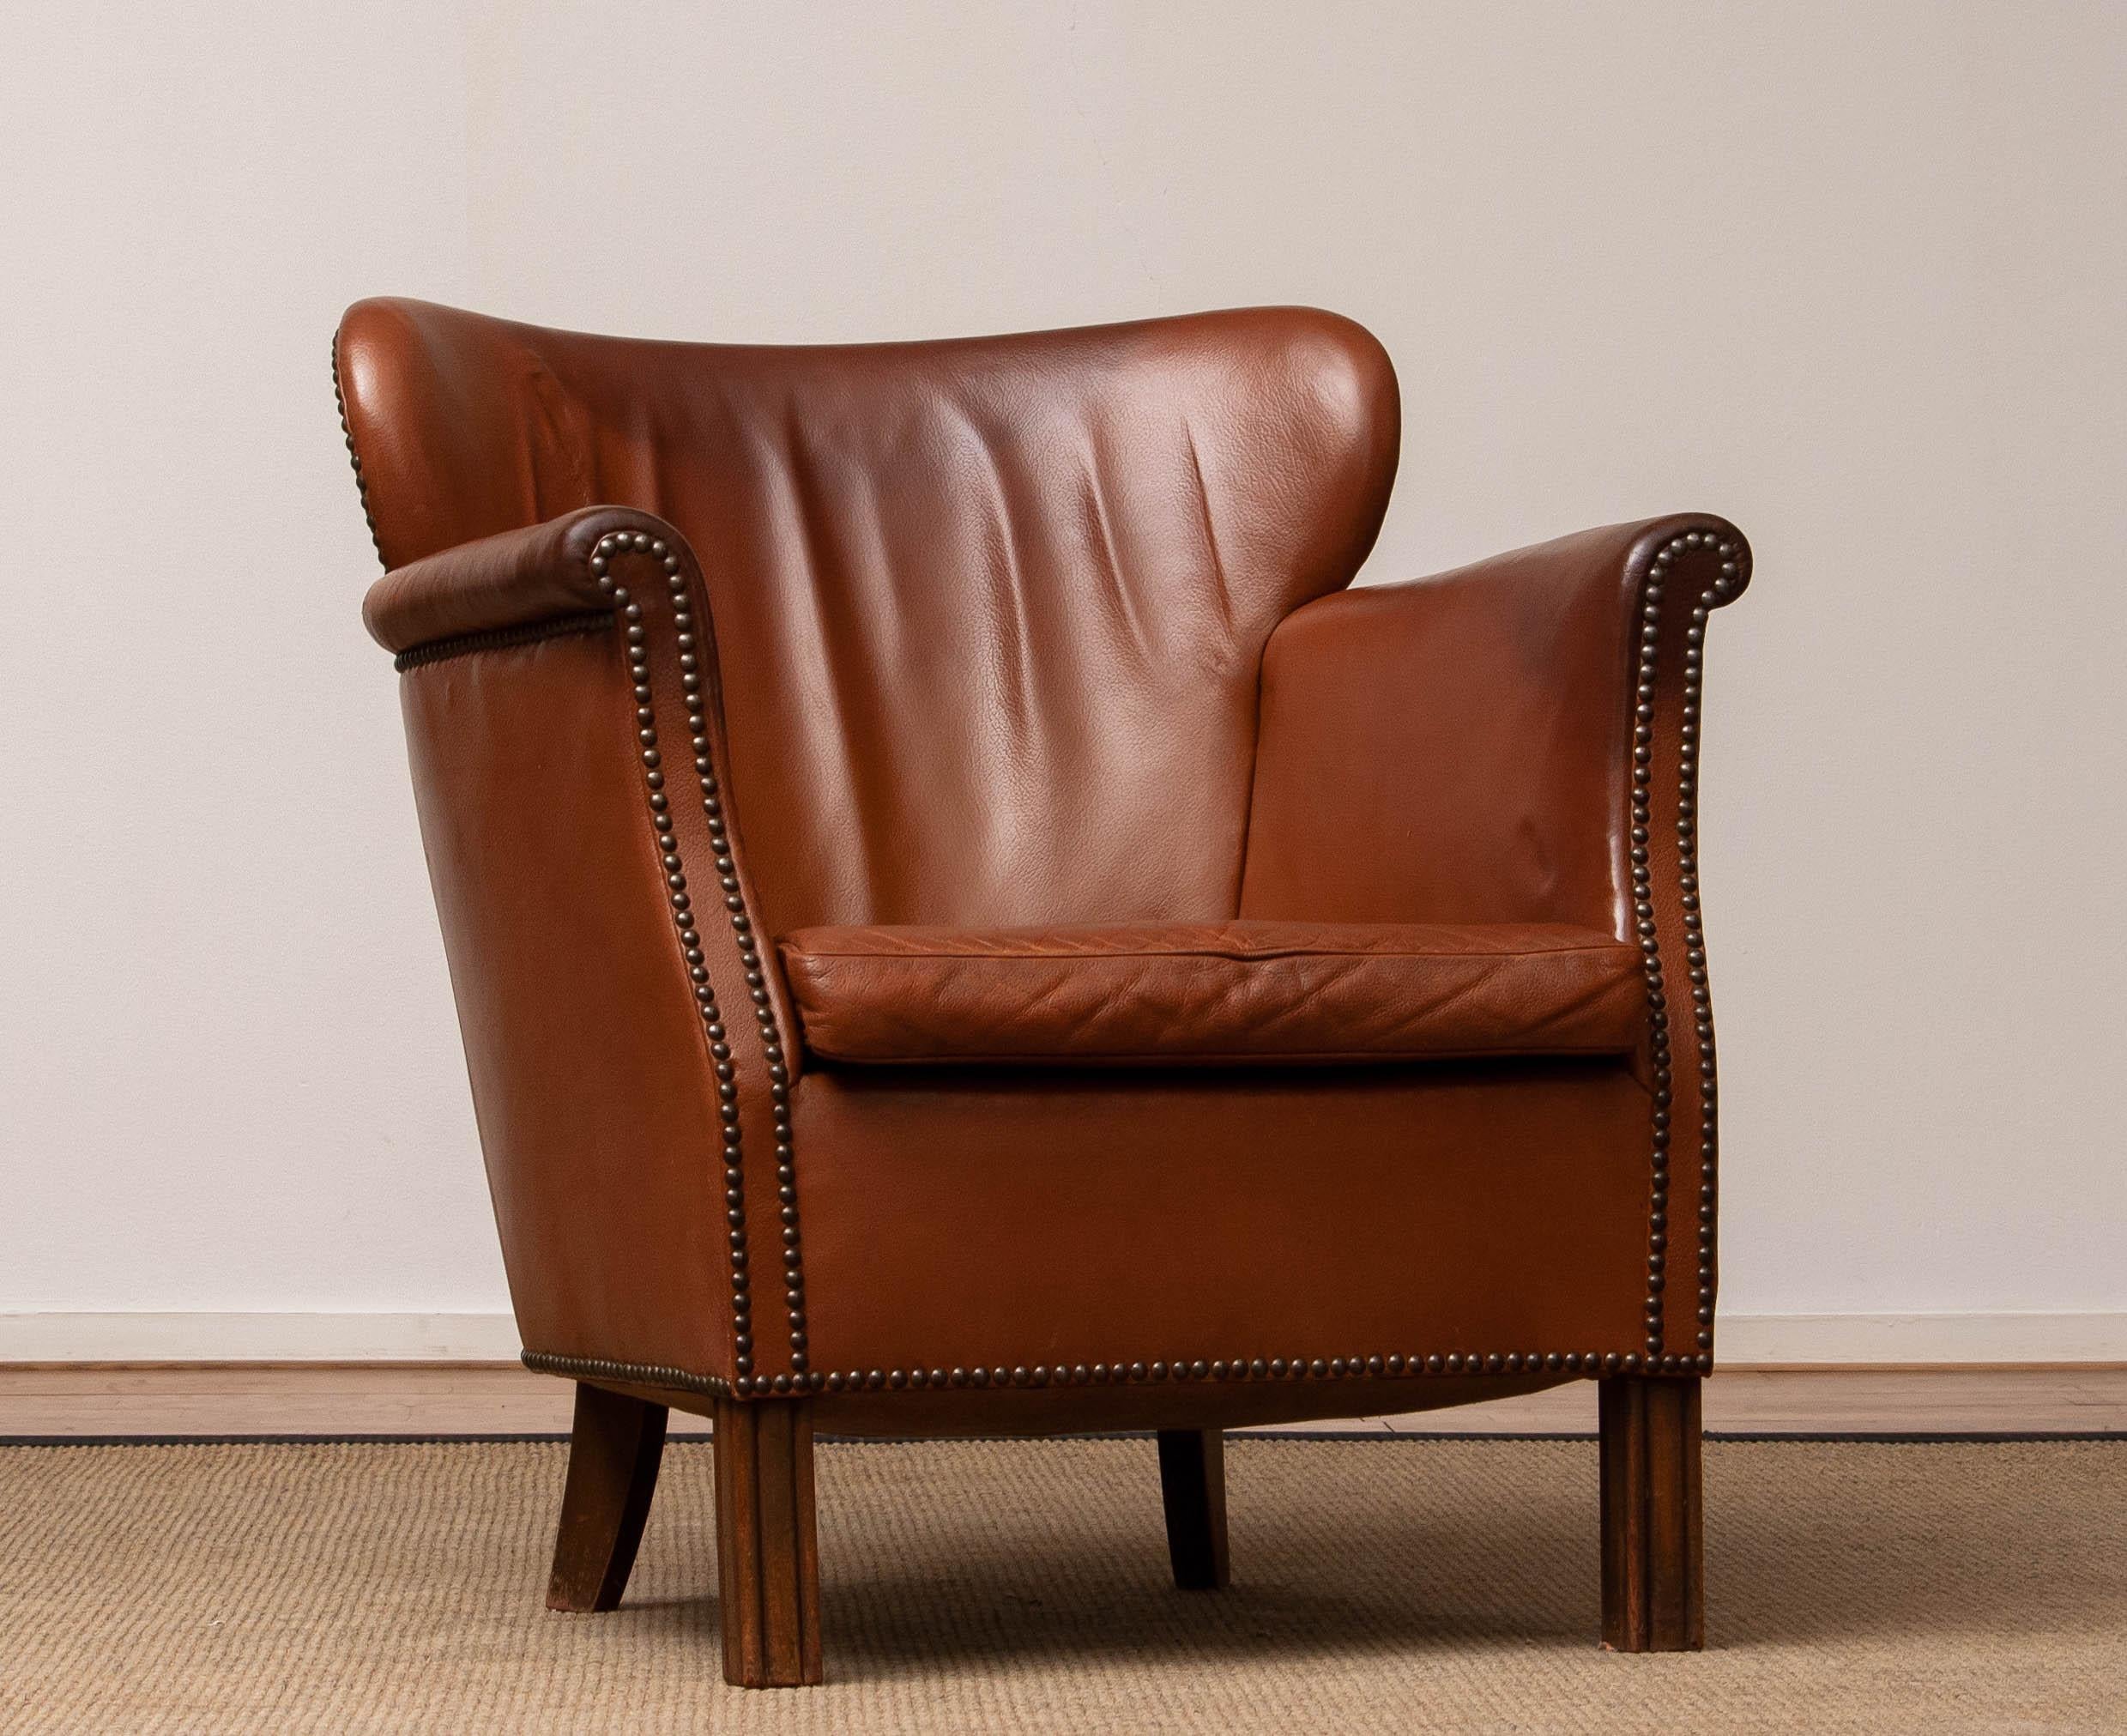 1940's Scandinavian Tan / Brown Nailed Leather Club / Cigar Chair from Denmark 4